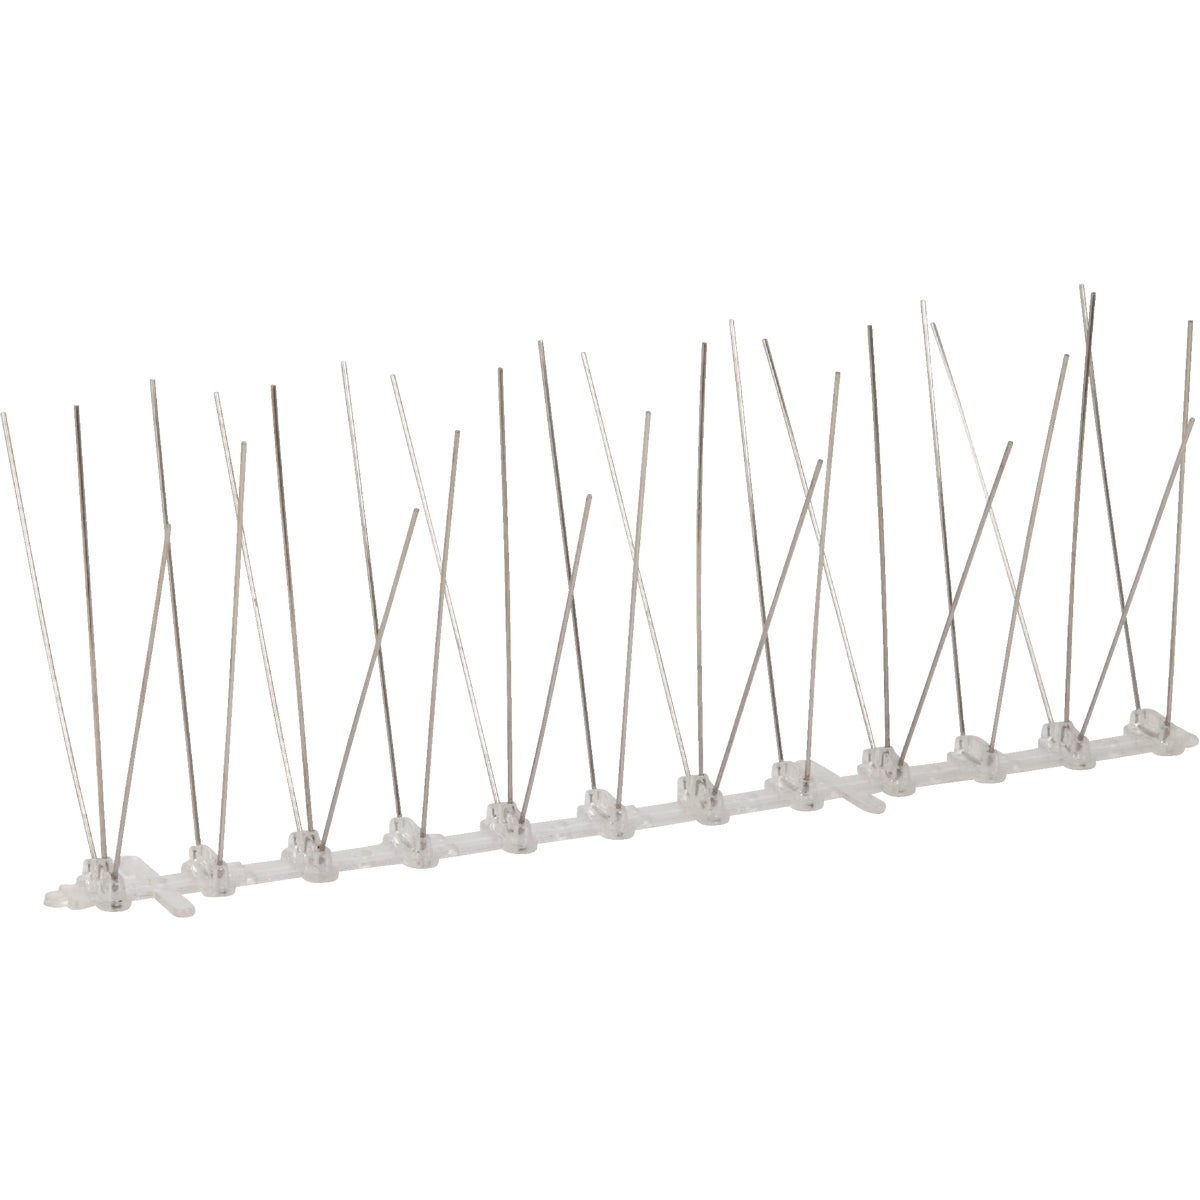 Item 738903, Stainless steel bird spikes kit includes (10) 1-foot strips.